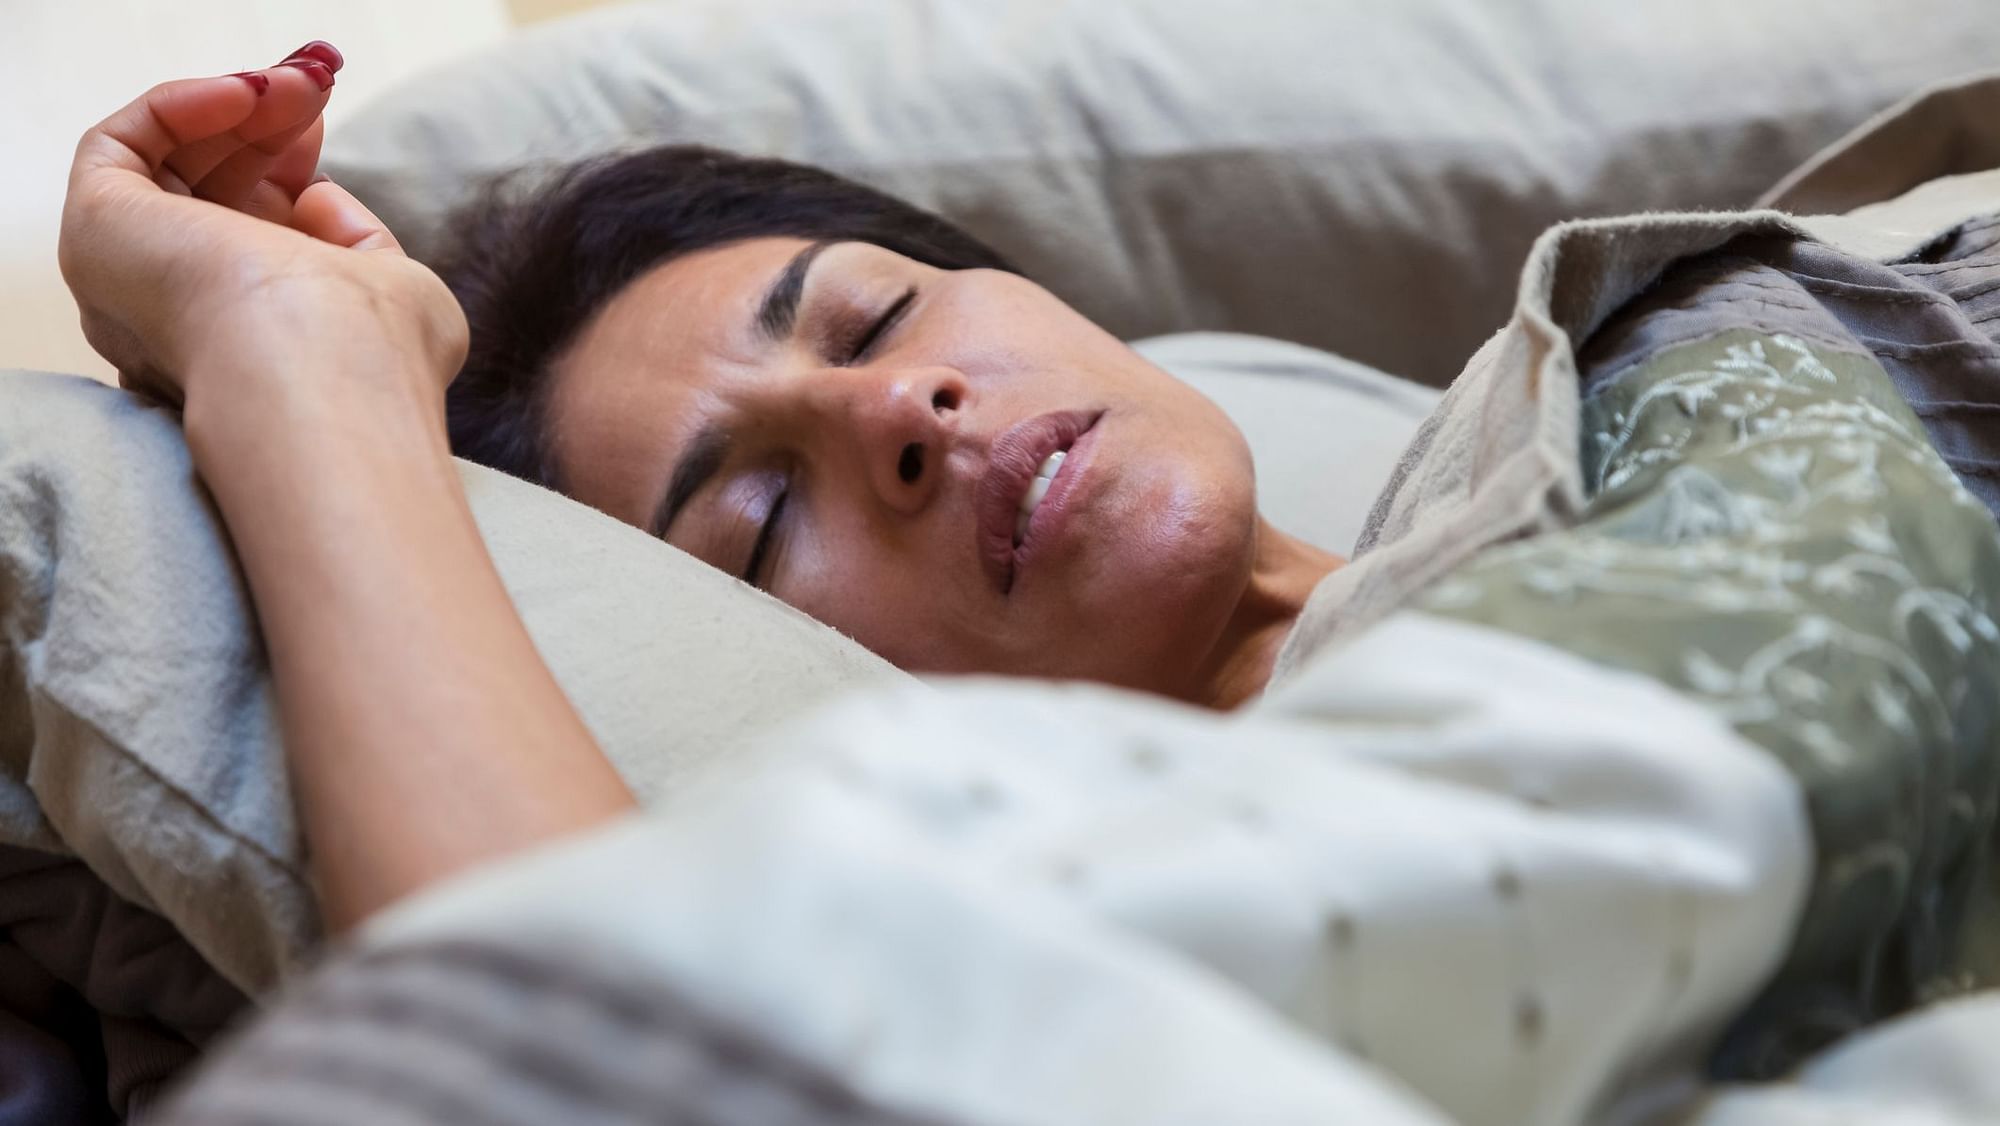 Obstructive Sleep Apnoea and snoring might lead to cardiovascular problems in women.